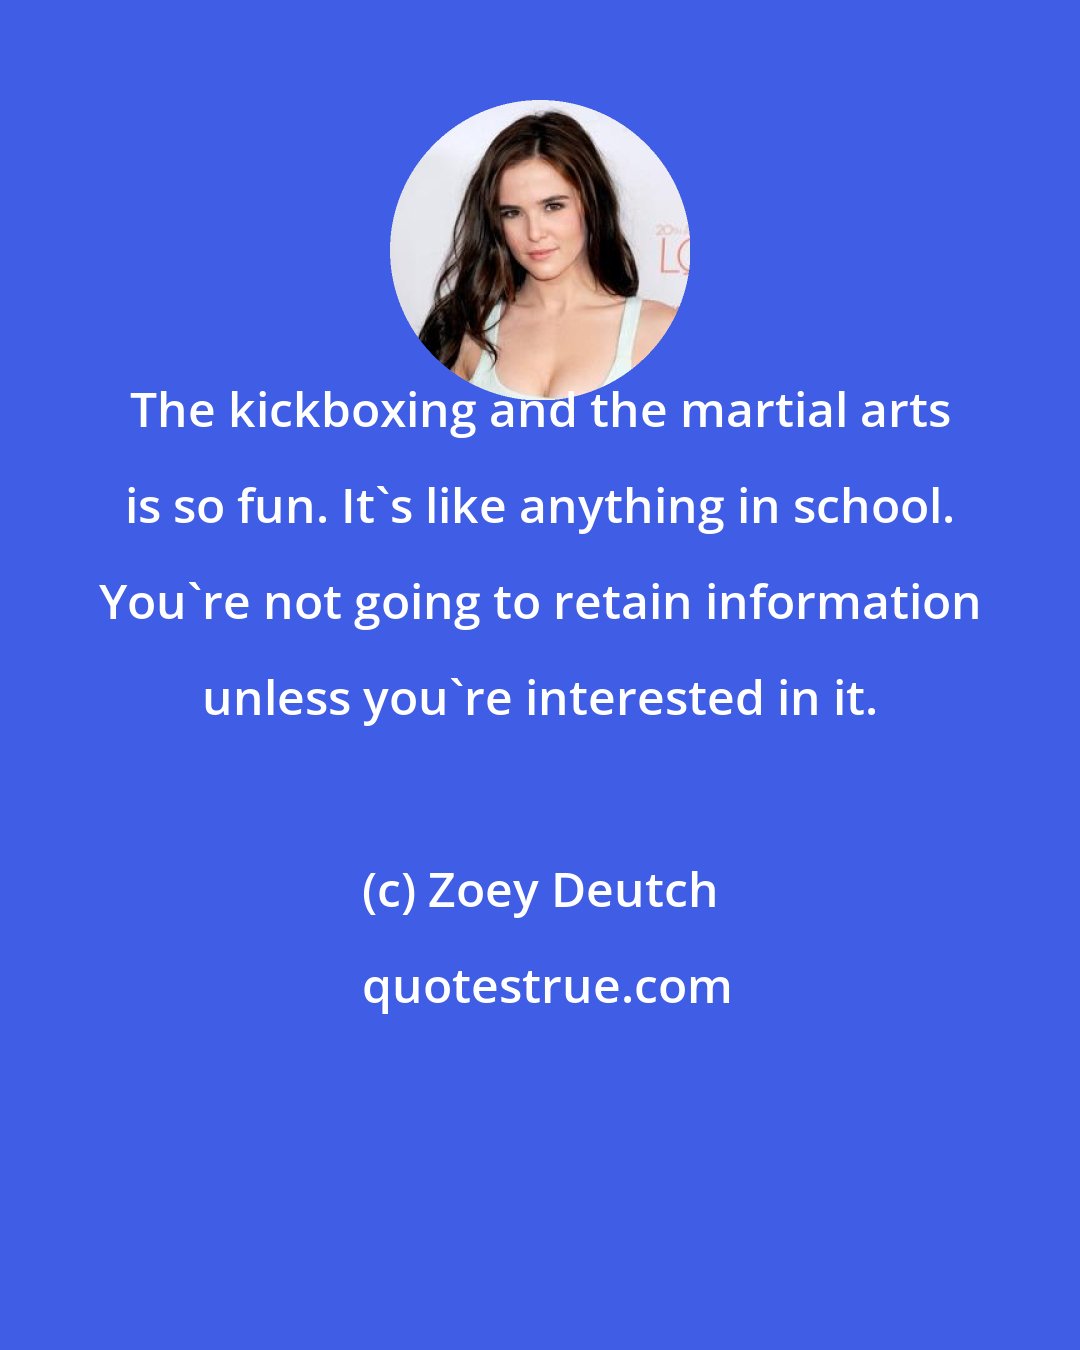 Zoey Deutch: The kickboxing and the martial arts is so fun. It's like anything in school. You're not going to retain information unless you're interested in it.